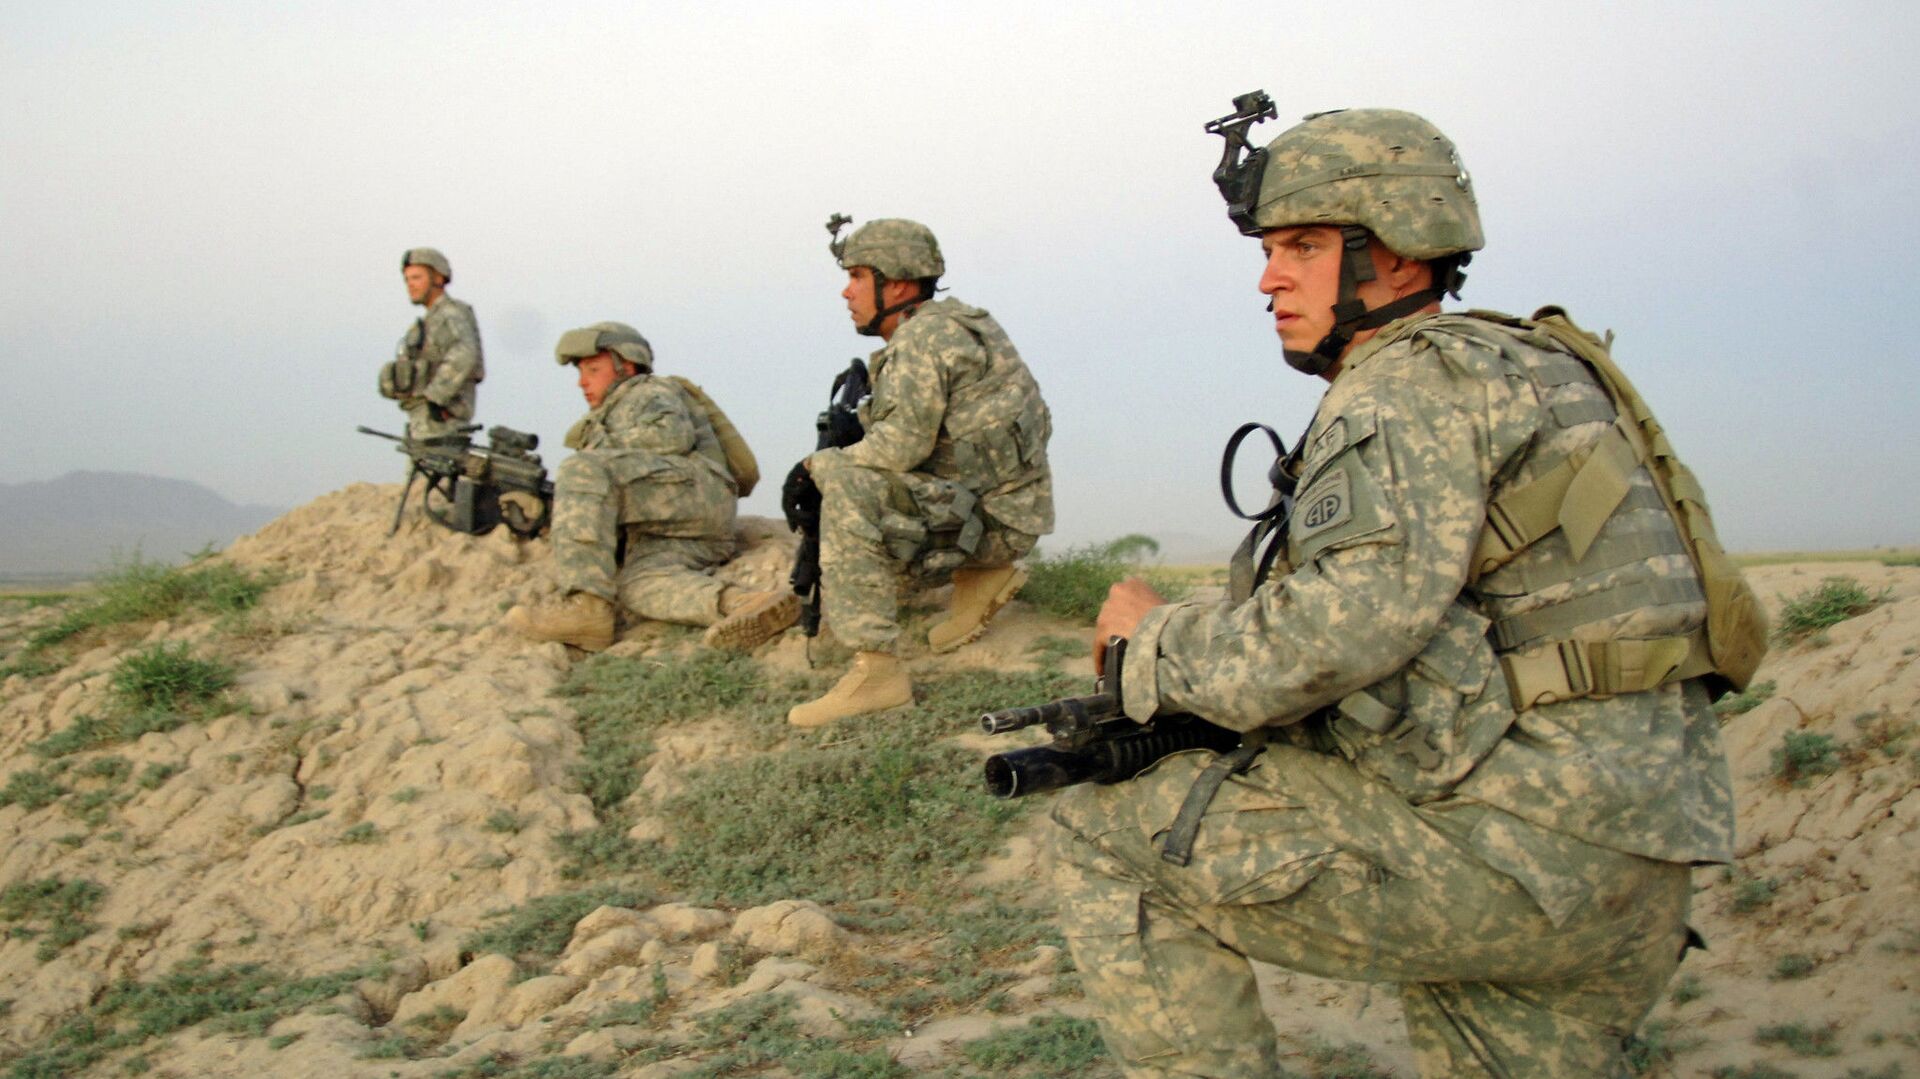 U.S Army Soldiers from Alpha Company, 2nd Battalion, 508th Parachute Infantry Regiment move into position to support Afghan National police who are moving in to apprehend a suspect during a cordon and search of Pana, Afghanistan, June 9, 2007 - Sputnik International, 1920, 03.05.2021